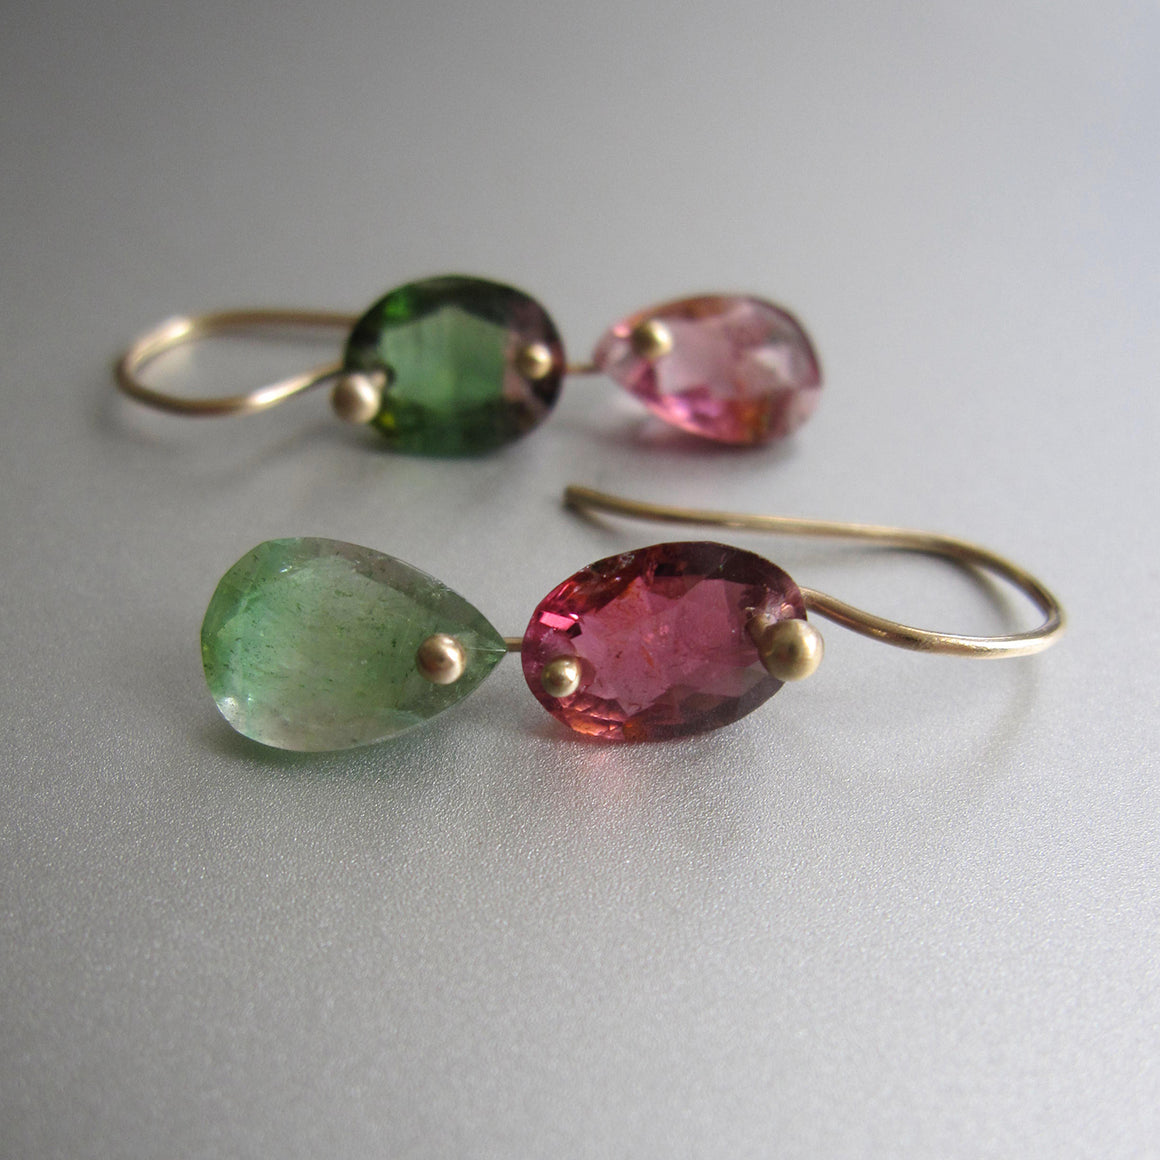 watermelon tourmaline mismatched green and pink double drops solid 14k gold earrings